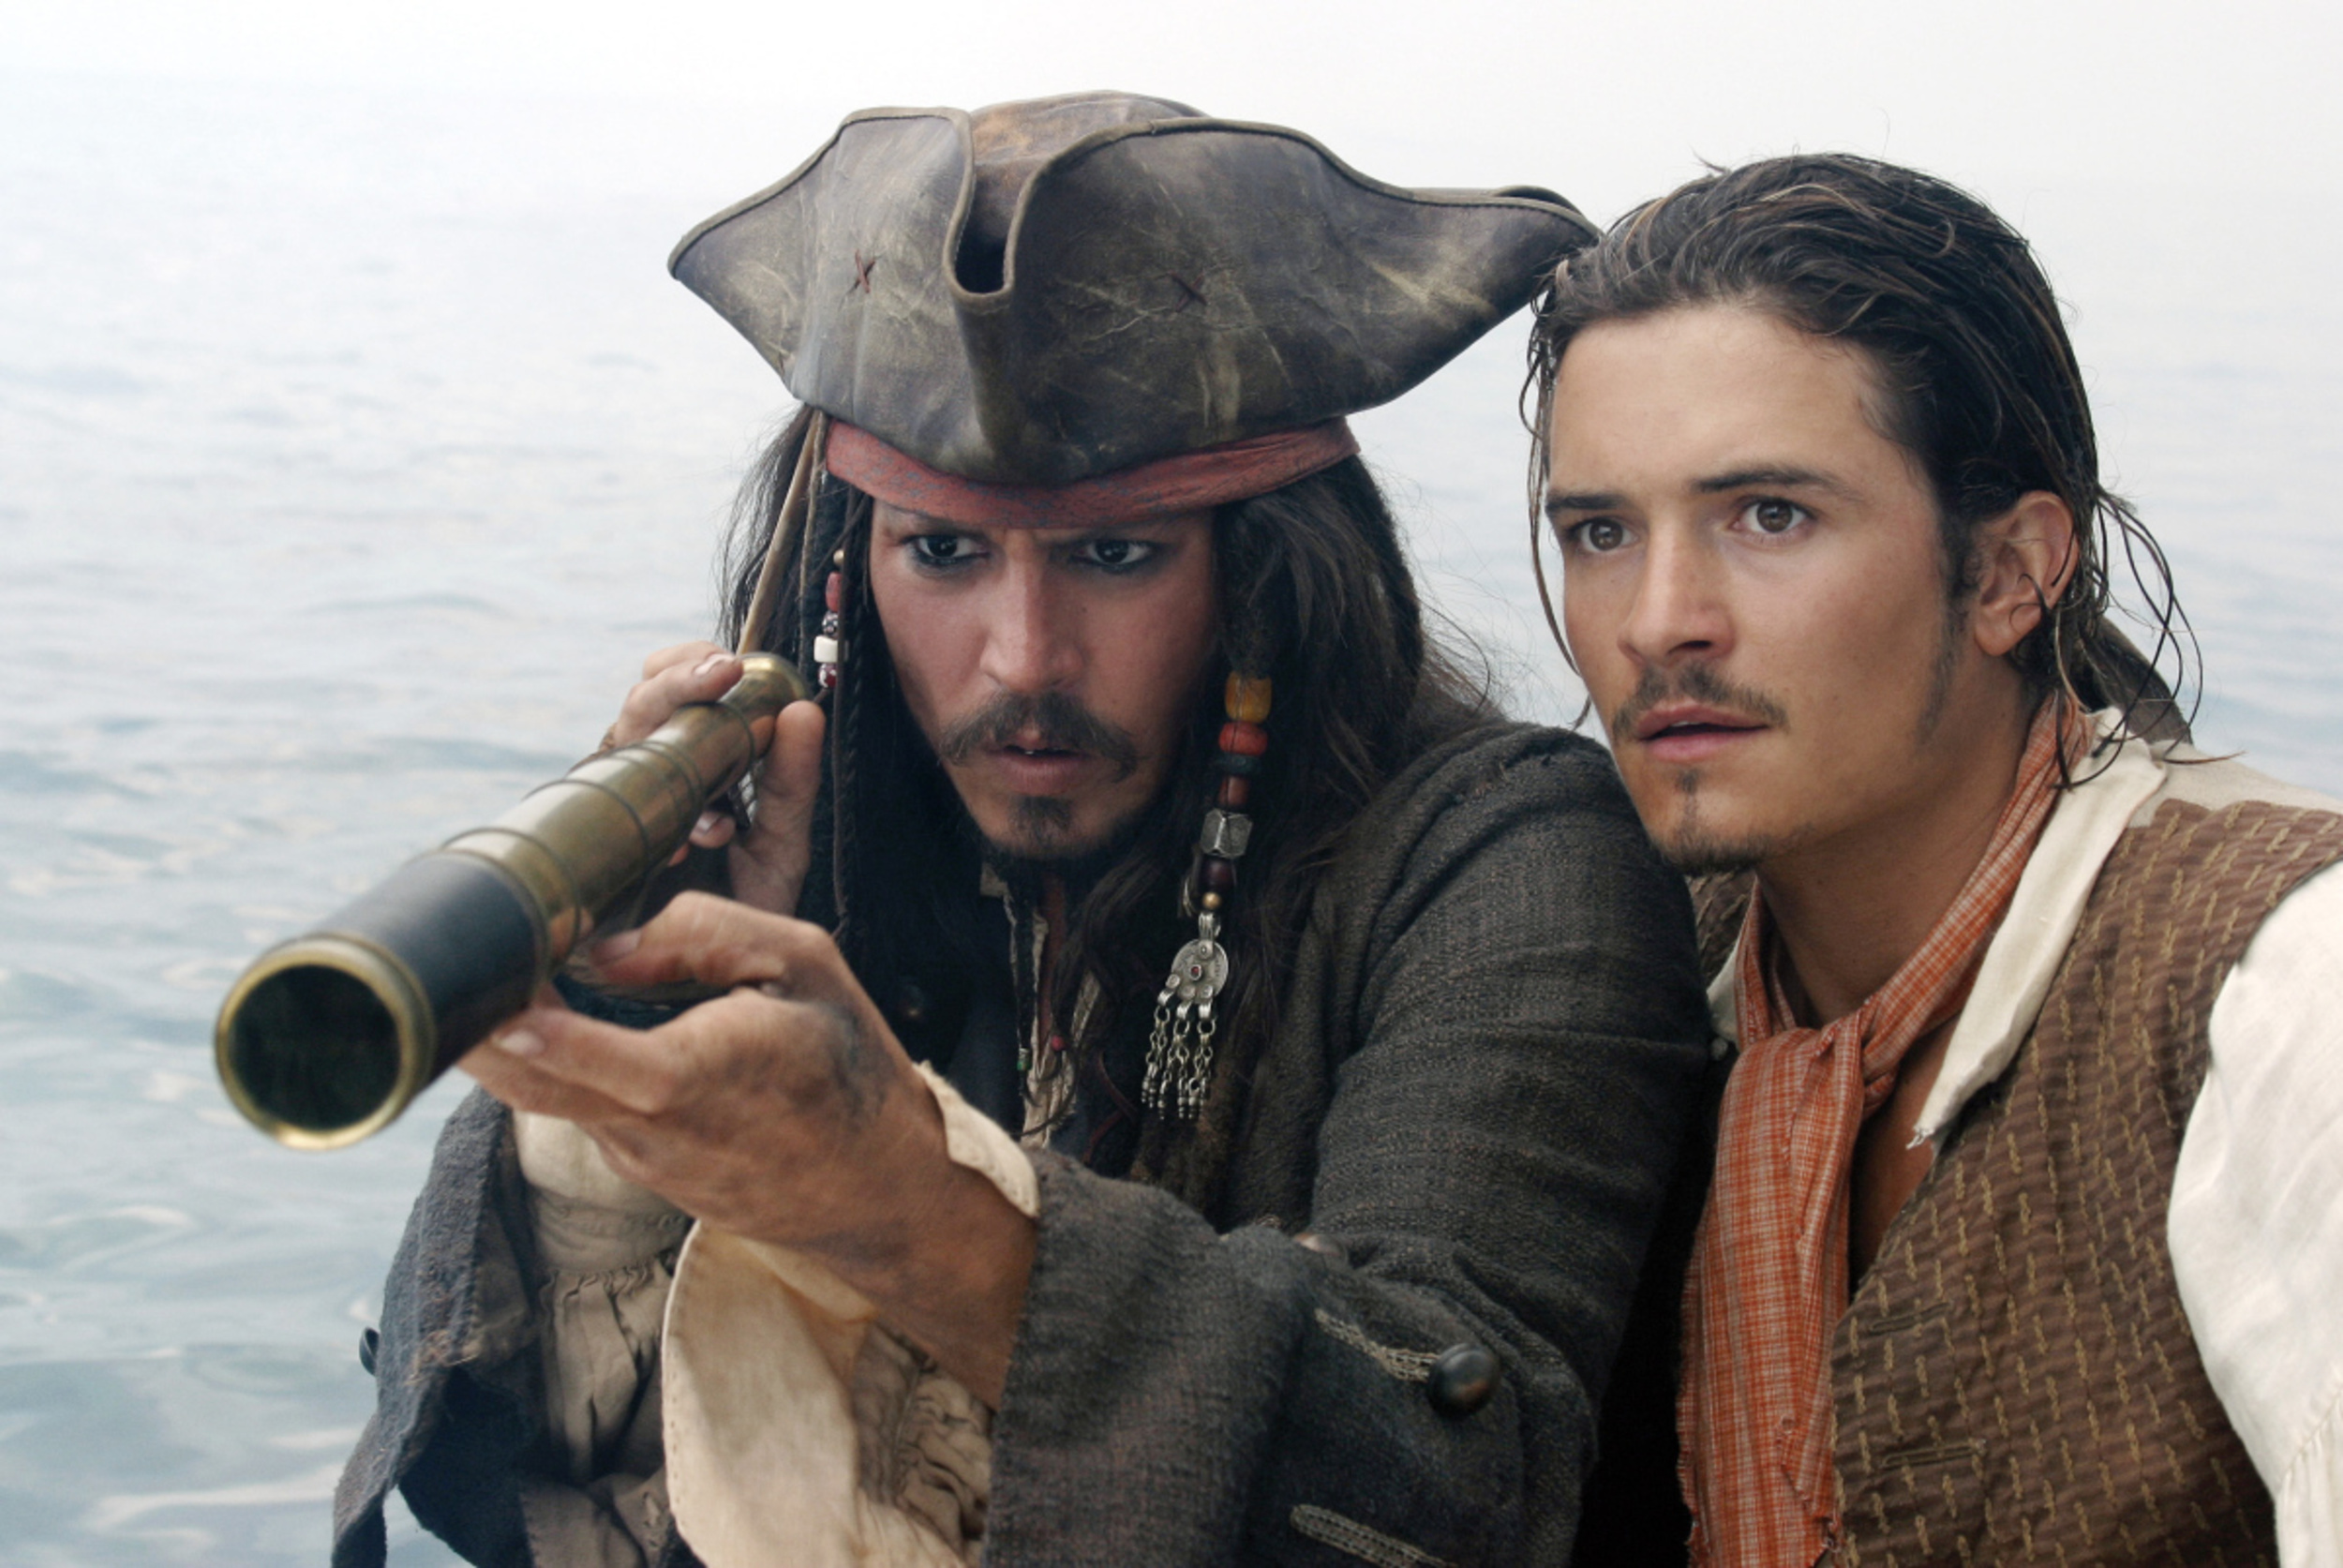 <p>The Academy Awards nominated <em>Curse of the Black Pearl </em>for Best Makeup, Best Sound Editing, Best Sound Mixing, and Best Visual Effects. Oh, and Best Actor. Yes, Johnny Depp, he of all the tics and worrying decisions, was nominated for his turn as Jack Sparrow. He didn’t win, but he showed Eisner and company why he was worth having faith in.</p><p>You may also like: <a href='https://www.yardbarker.com/entertainment/articles/20_tv_shows_you_may_not_know_were_inspired_by_real_life_events_030524/s1__39202474'>20 TV shows you may not know were inspired by real-life events</a></p>